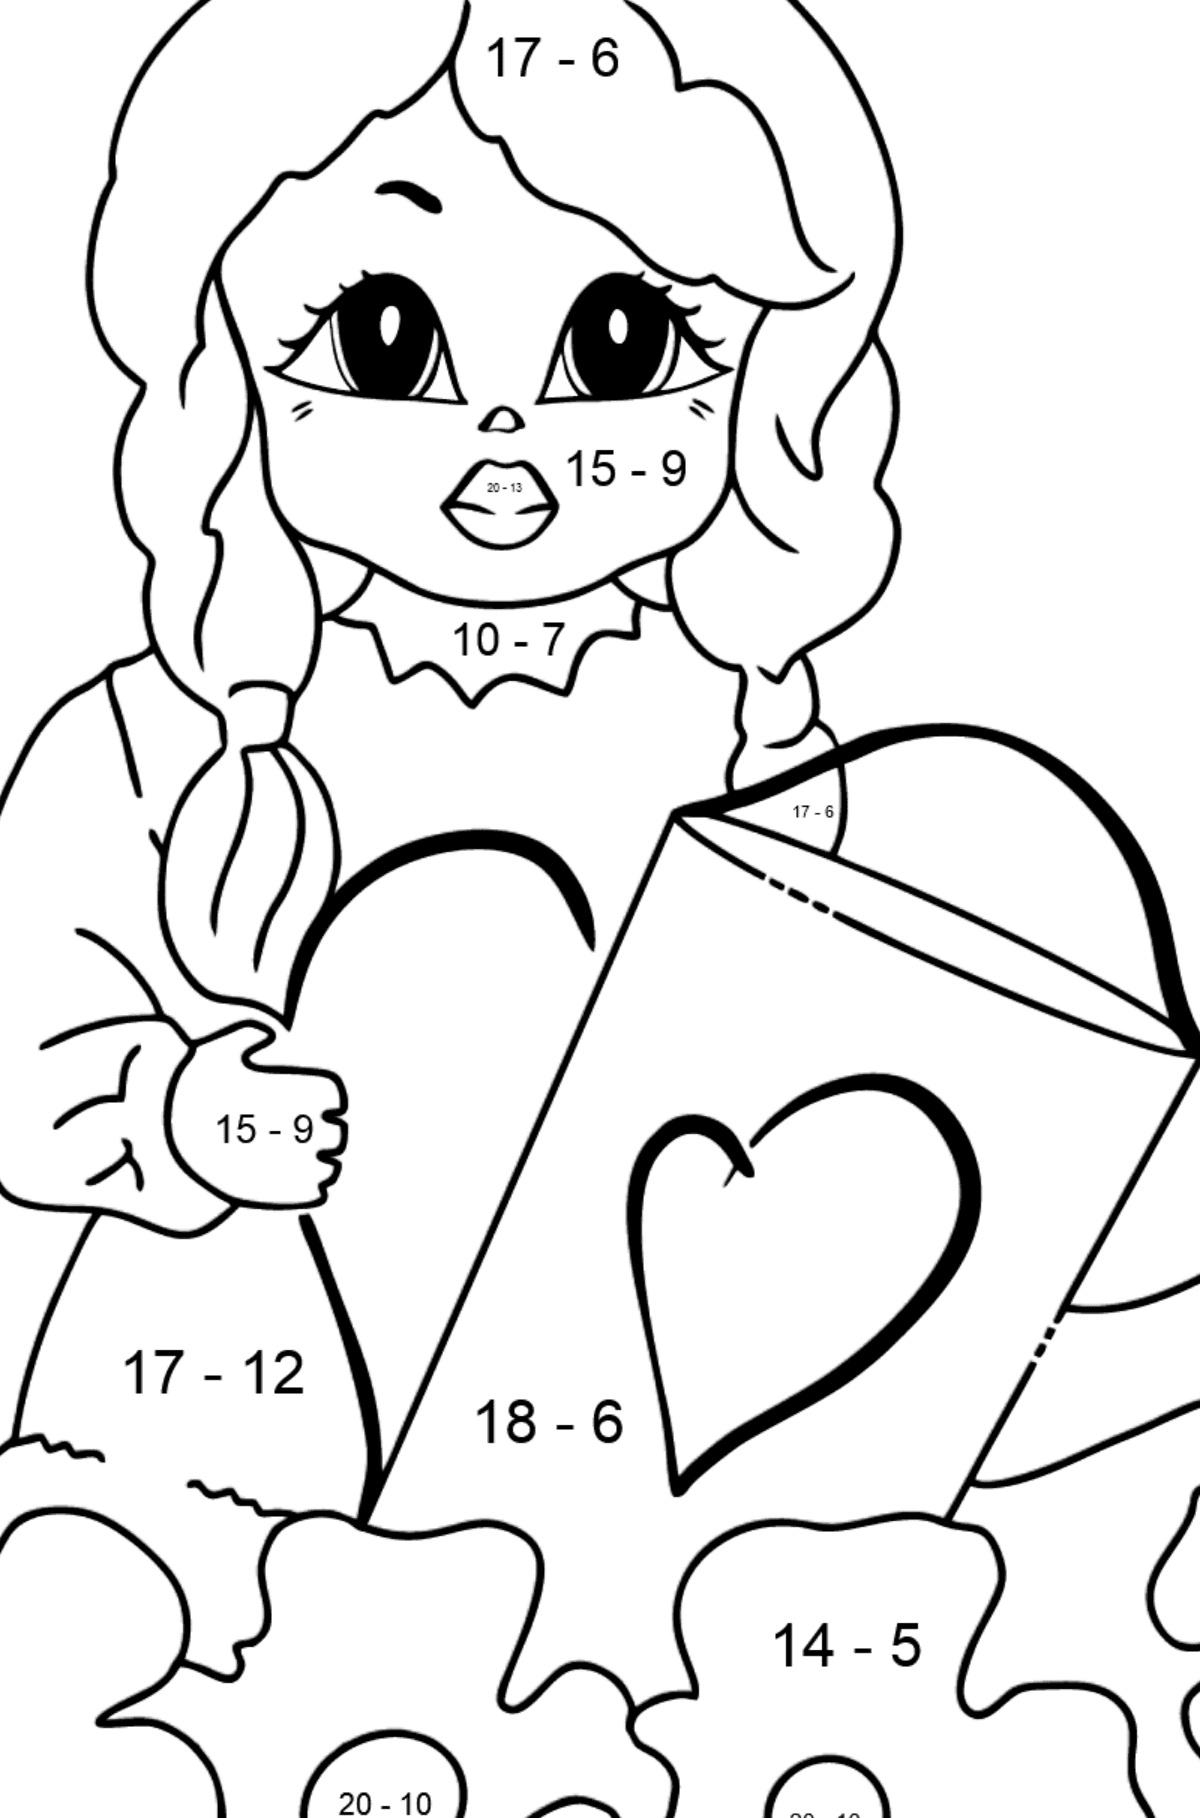 Coloring Picture - A Princess with a Watering Can - Math Coloring - Subtraction for Kids